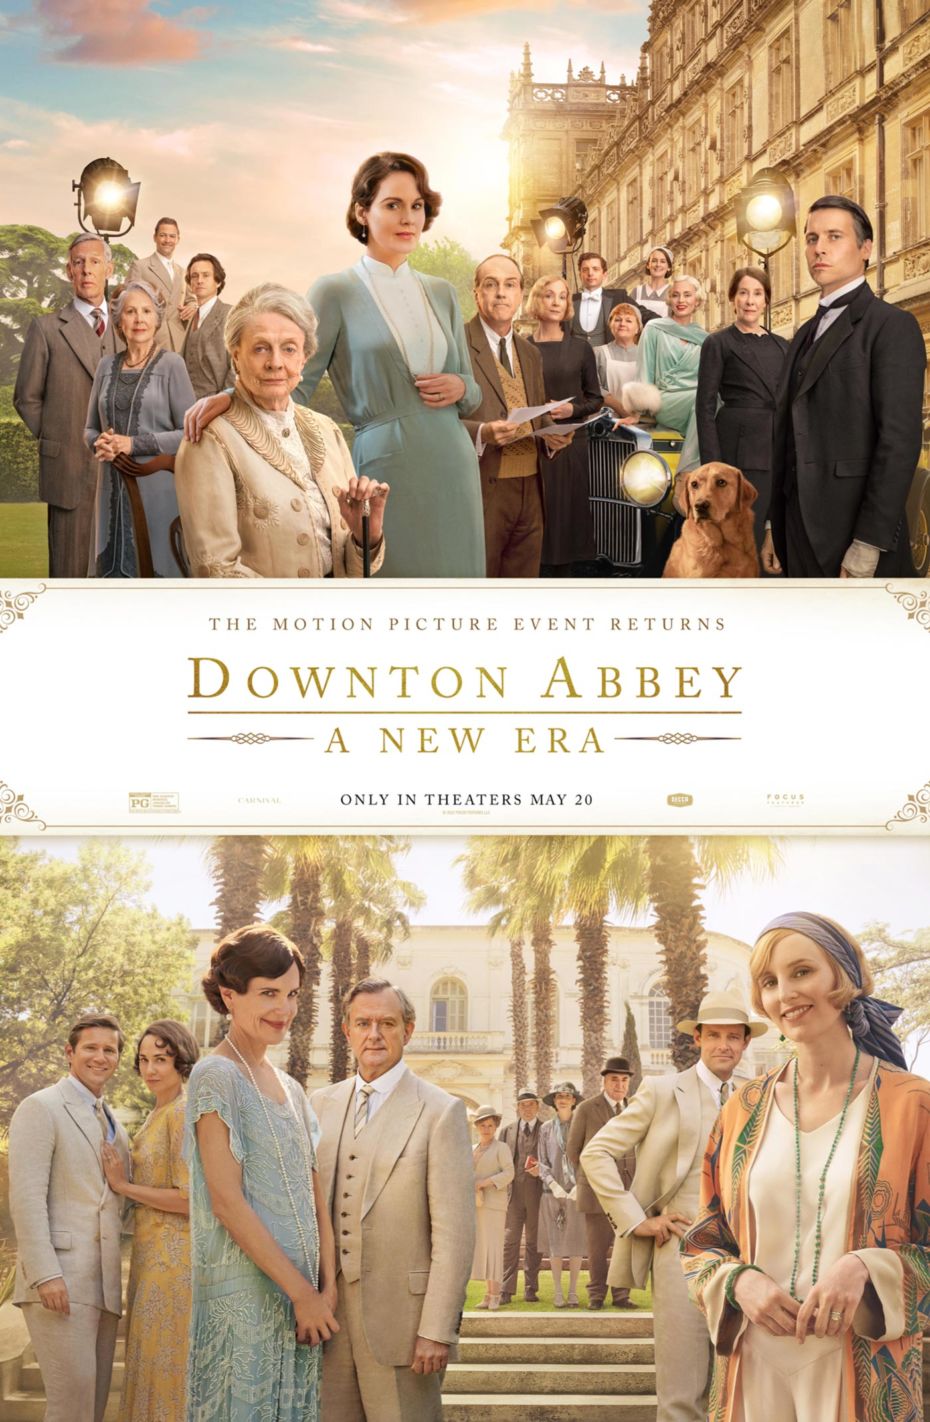 POSTER FOR DOWNTON ABBEY: A NEW ERA